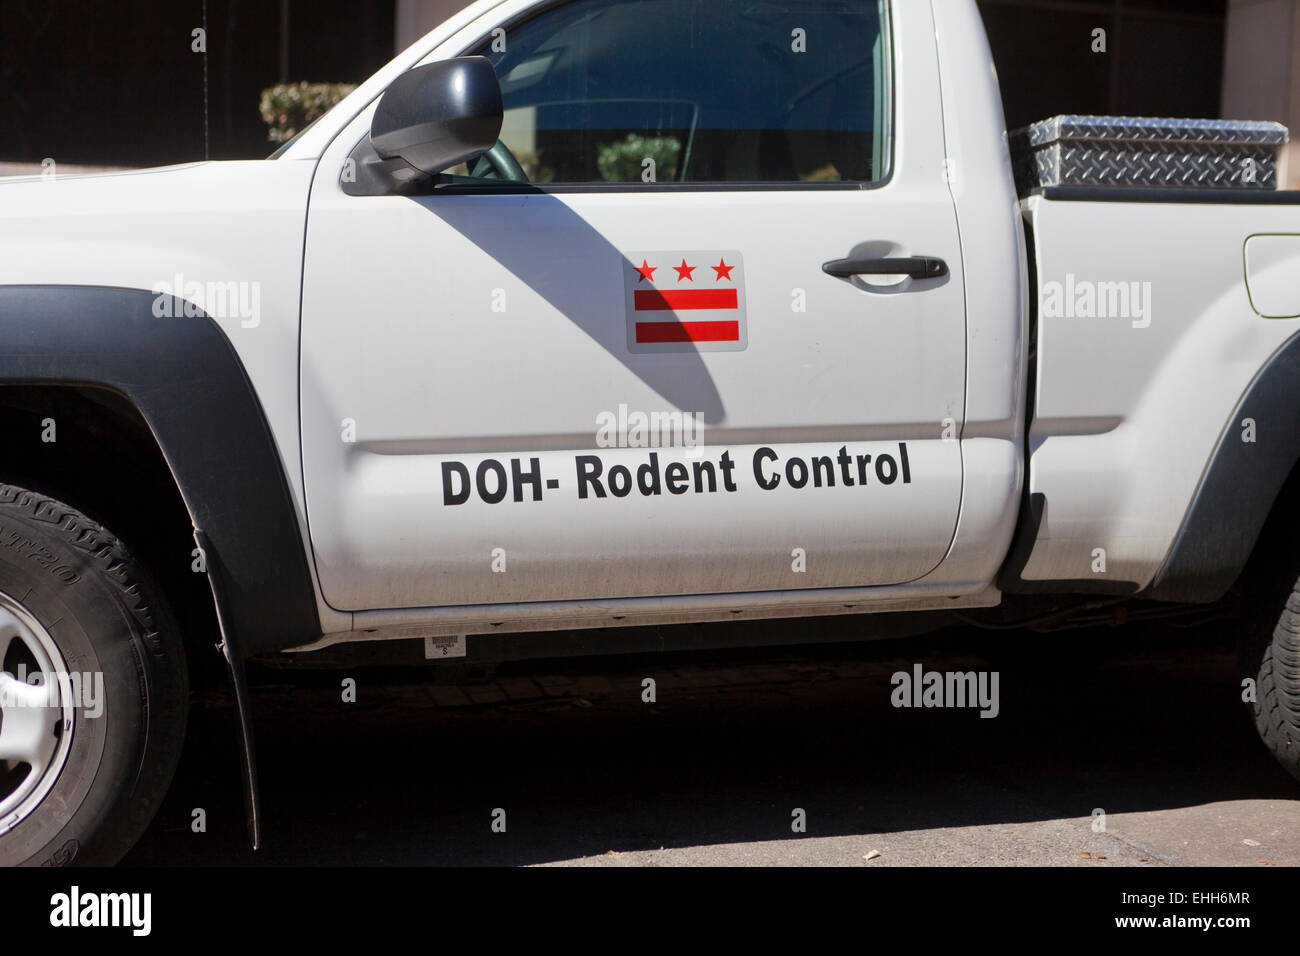 Department of Housing Rodent Control service truck - Washington, DC USA Stock Photo